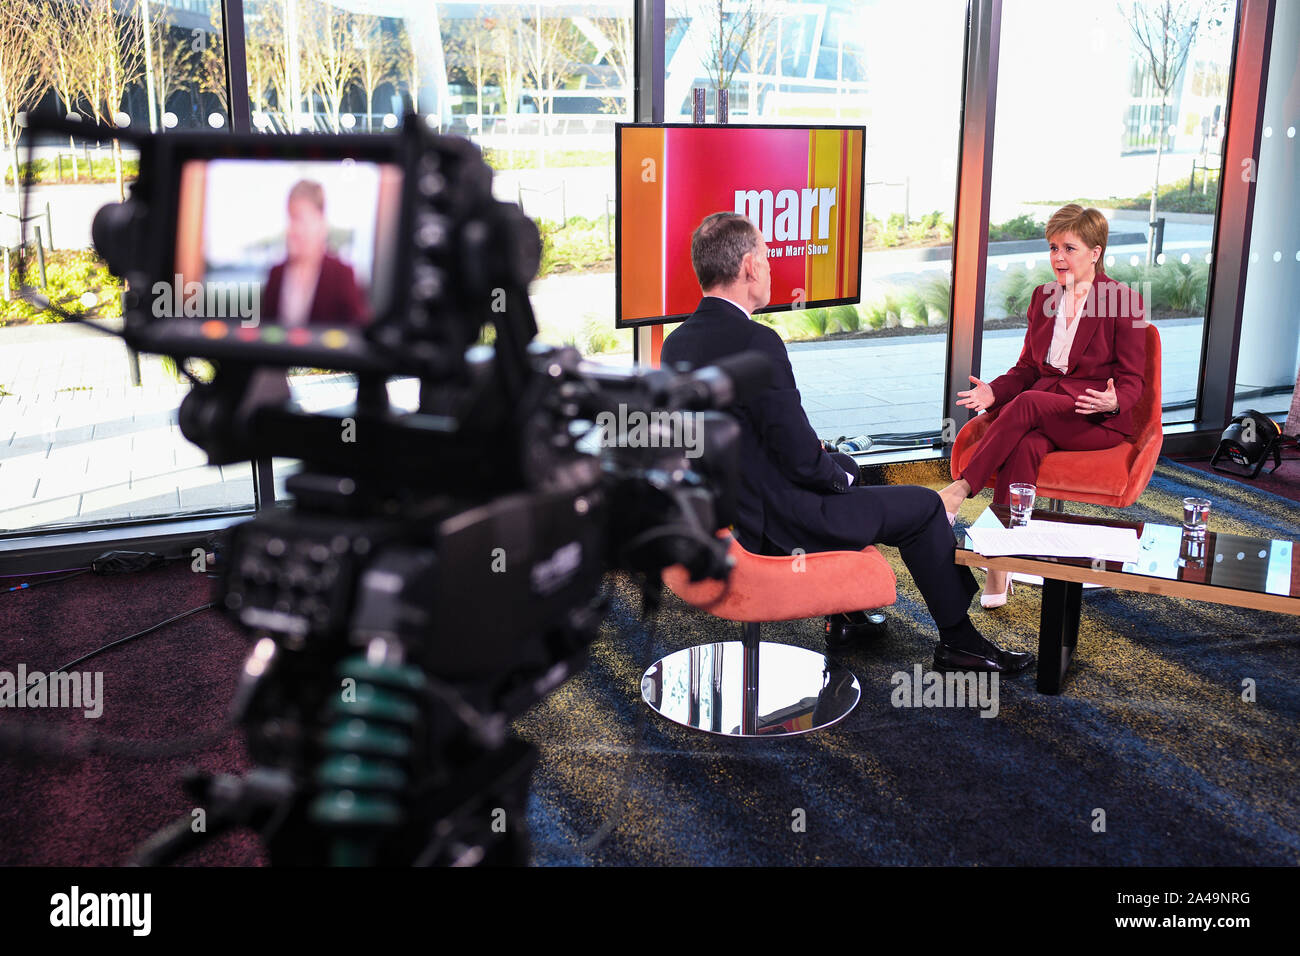 Presenter Andrew Marr and First Minister of Scotland Nicola Sturgeon, during the Andrew Marr show. Nicola Sturgeon has told Jeremy Corbyn 'don't even bother picking up the phone' to ask the SNP to support a Labour government unless he backs an independence vote. PA Photo. Picture date: Sunday October 13, 2019. Scotland's First Minister was asked if she would consider a coalition with Labour in the event of a general election that saw it emerge as the largest party, but without an overall majority. The SNP leader said she would favour a 'progressive type of alliance' if the Tories were ousted f Stock Photo